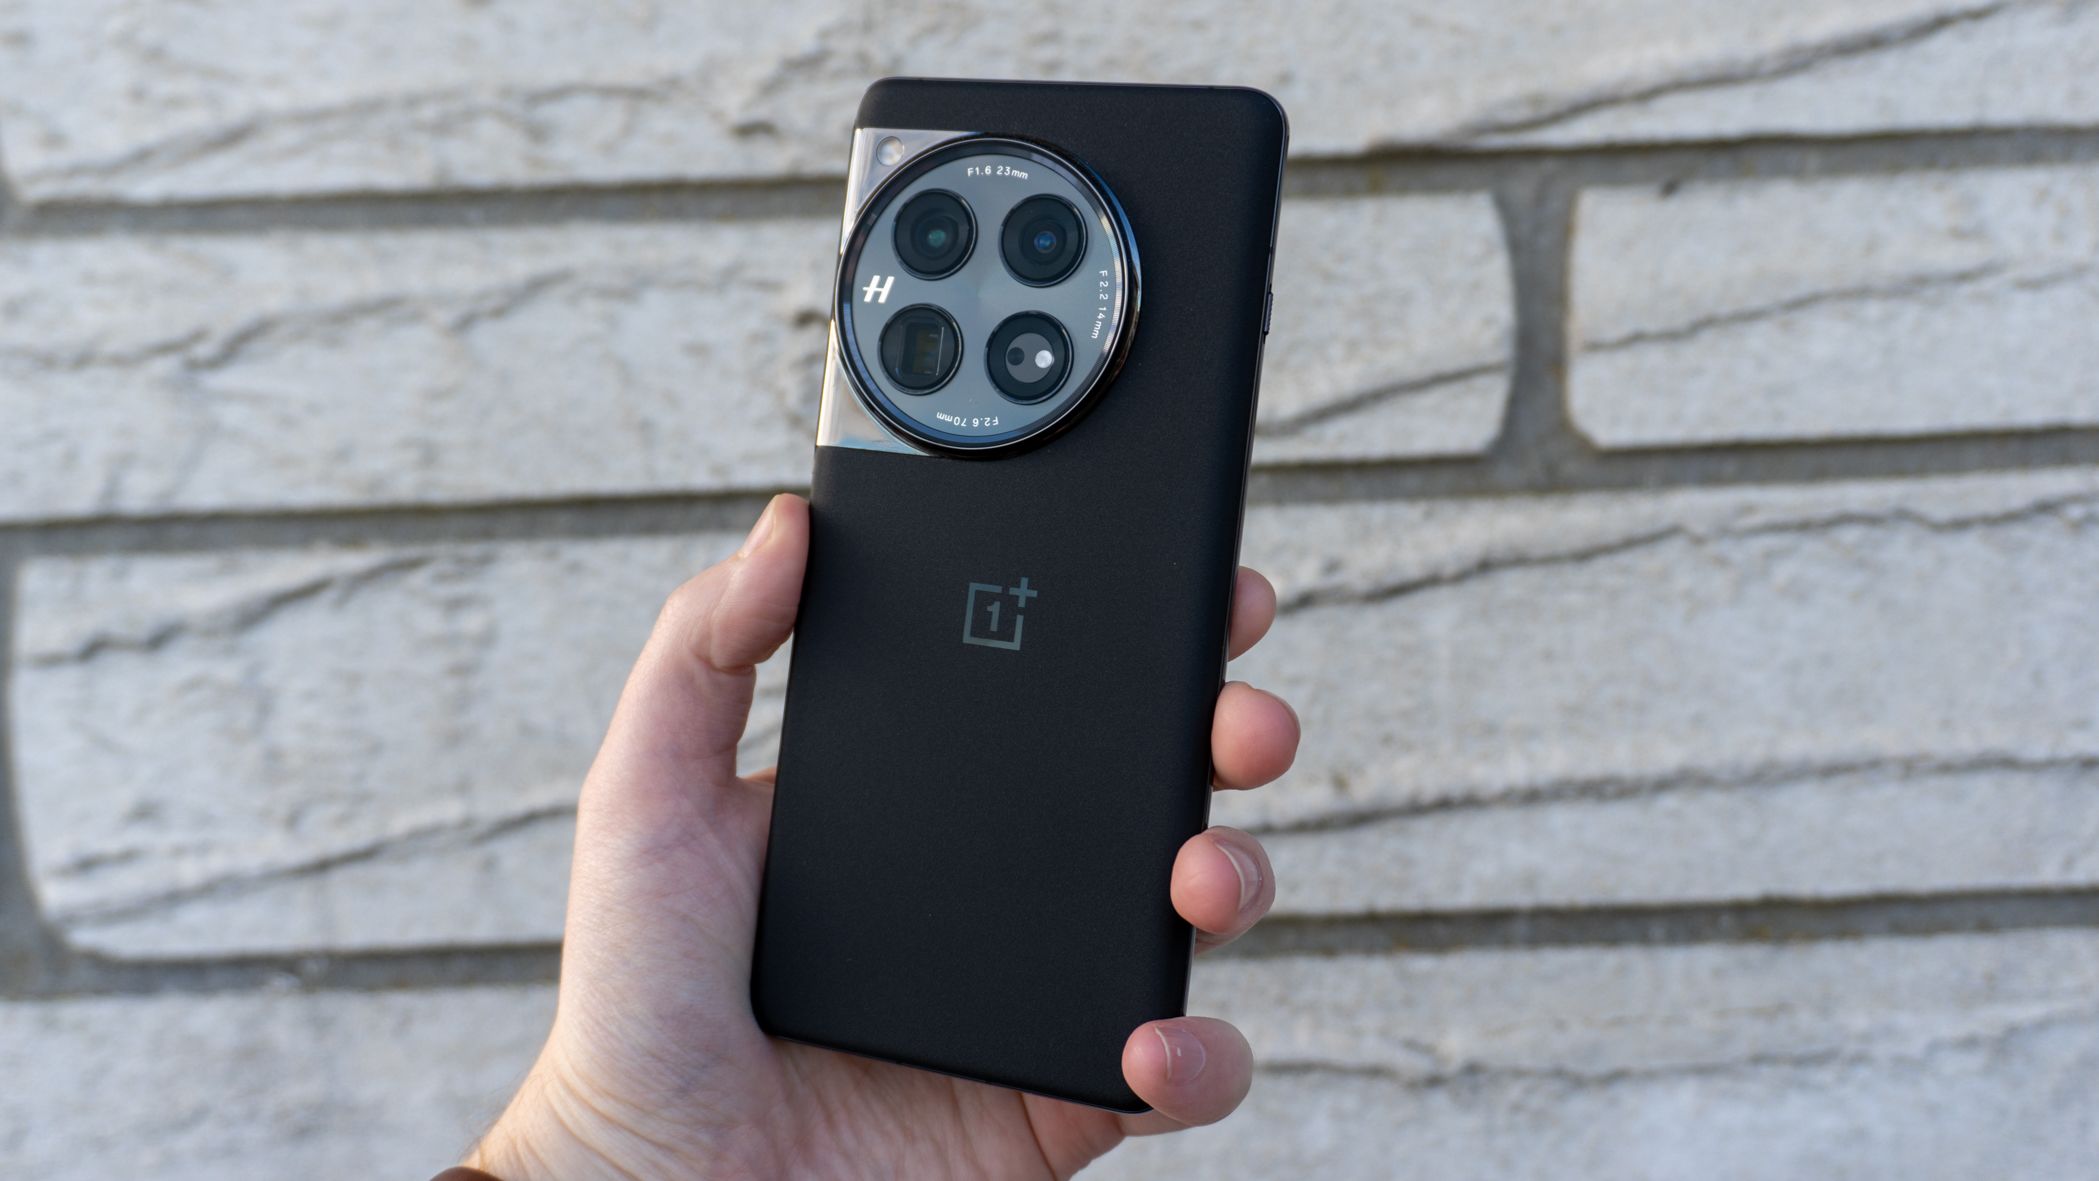 OnePlus 12 With Snapdragon 8 Gen 3 Launched in India Alongside